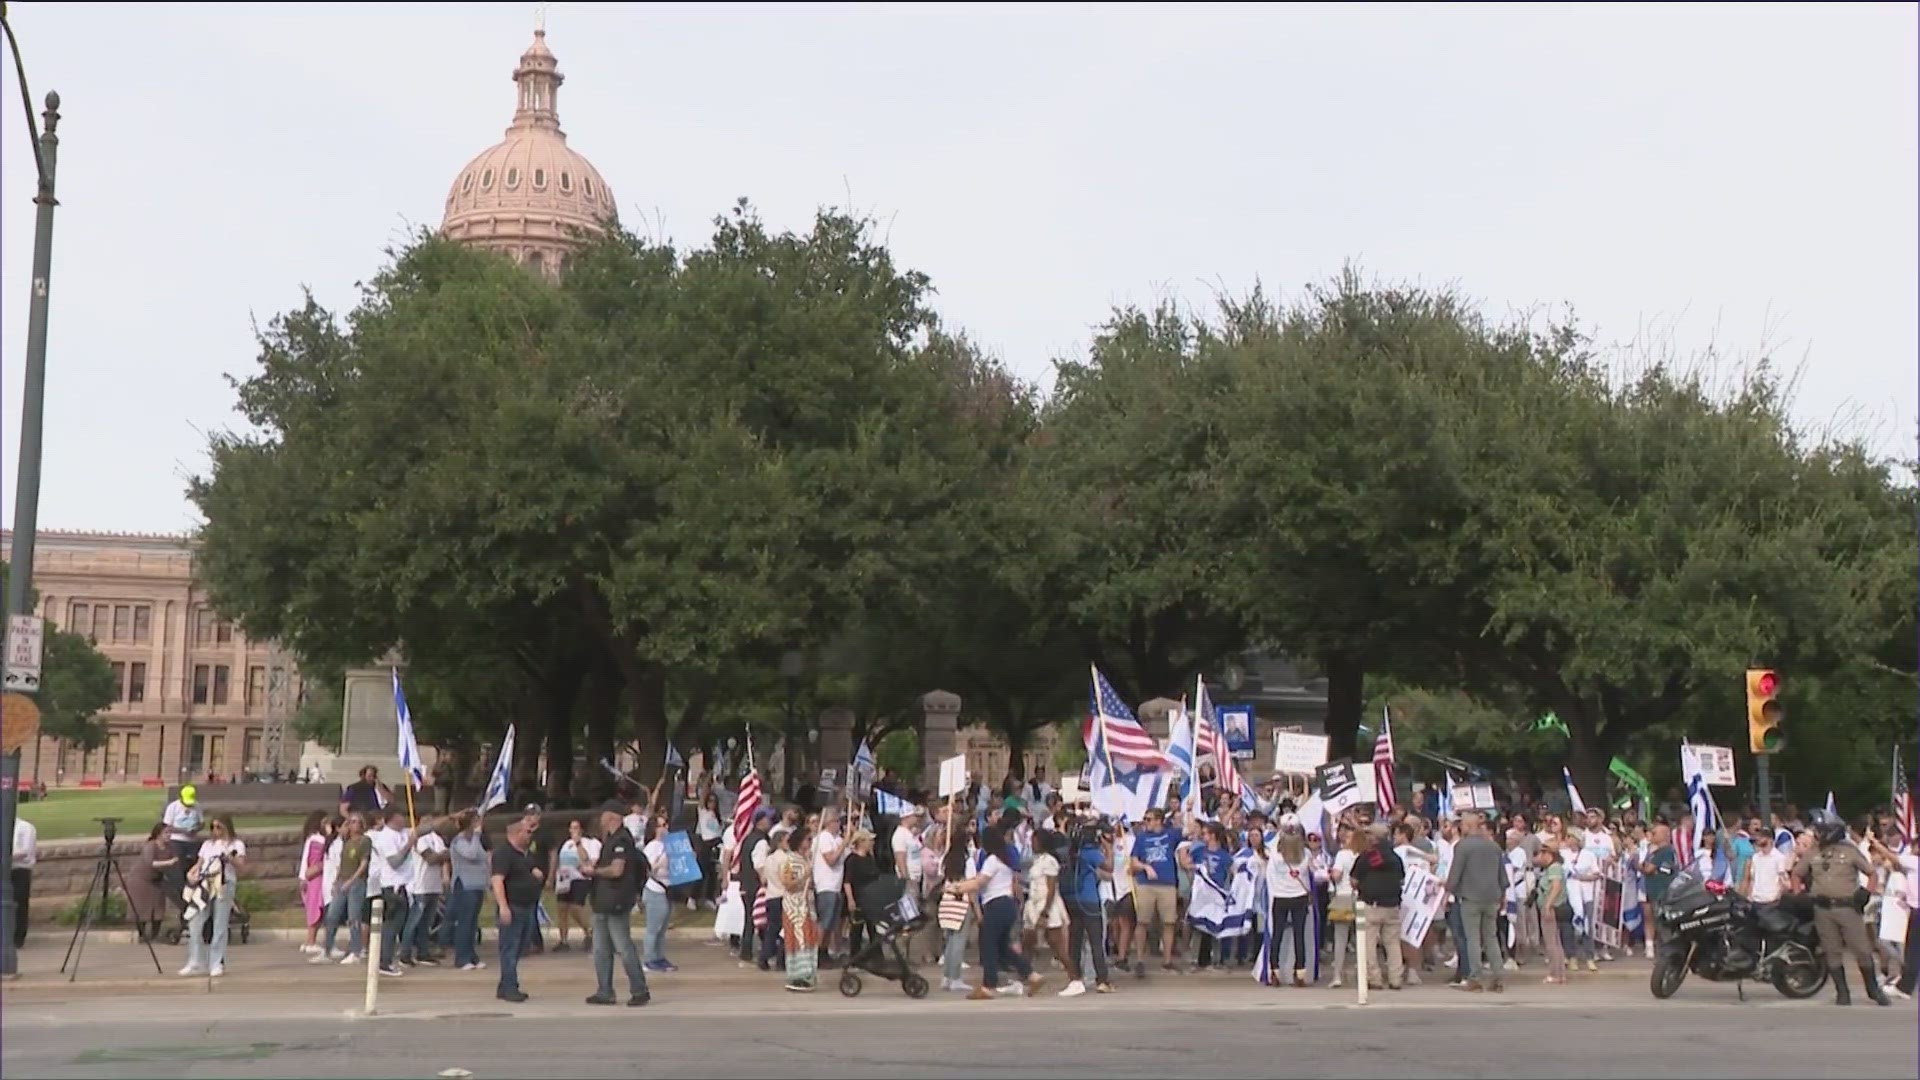 The Israel-American Council held a march at the Texas Capitol on Sunday.